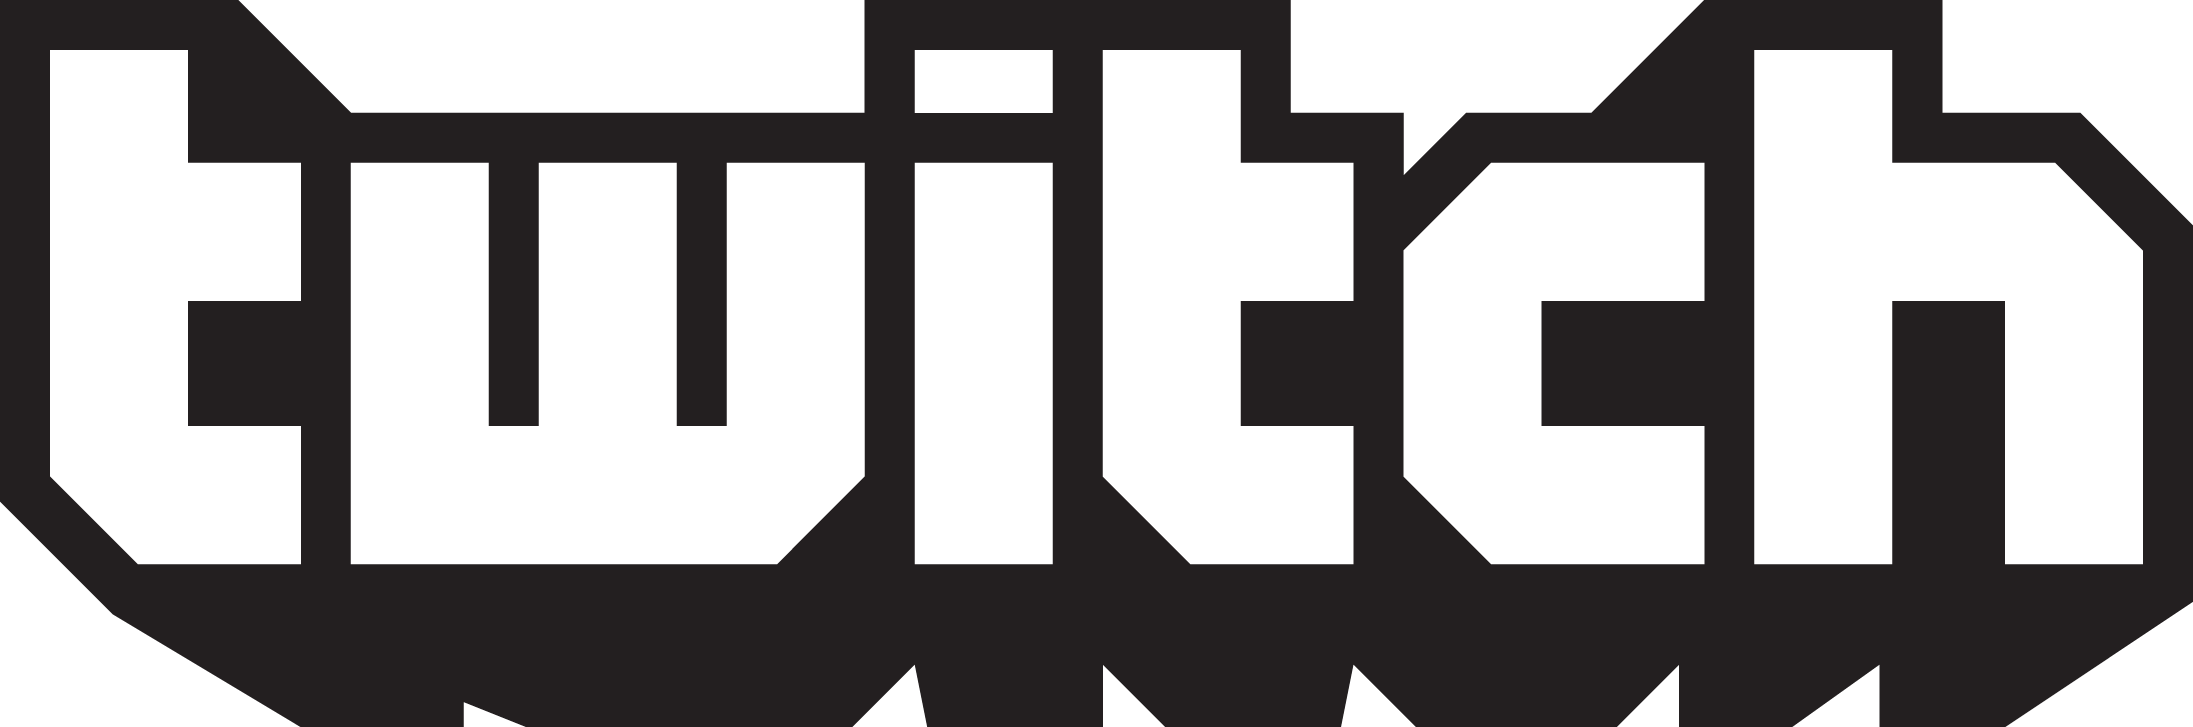 Twitch Launches Xbox Viewing App - Logo Twitch (3300x1094)